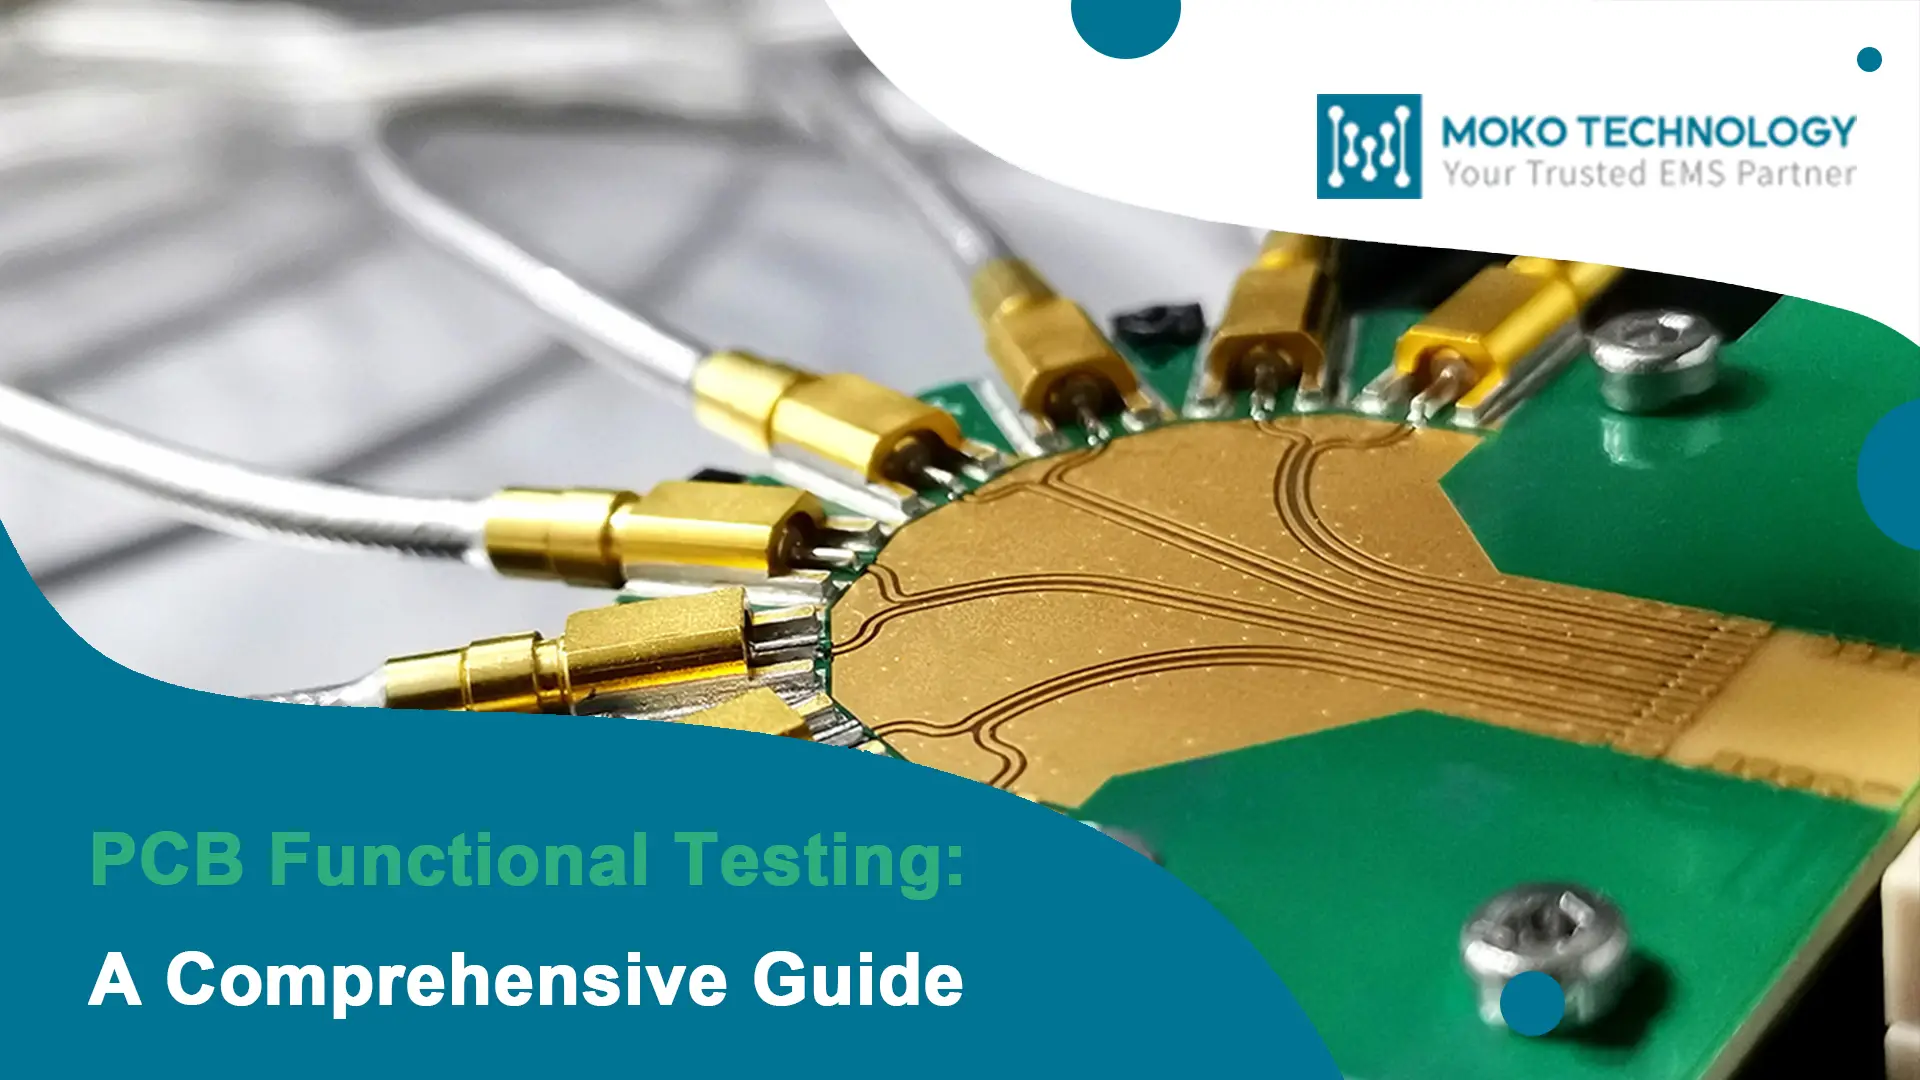 PCB Functional Testing: A Comprehensive Guide